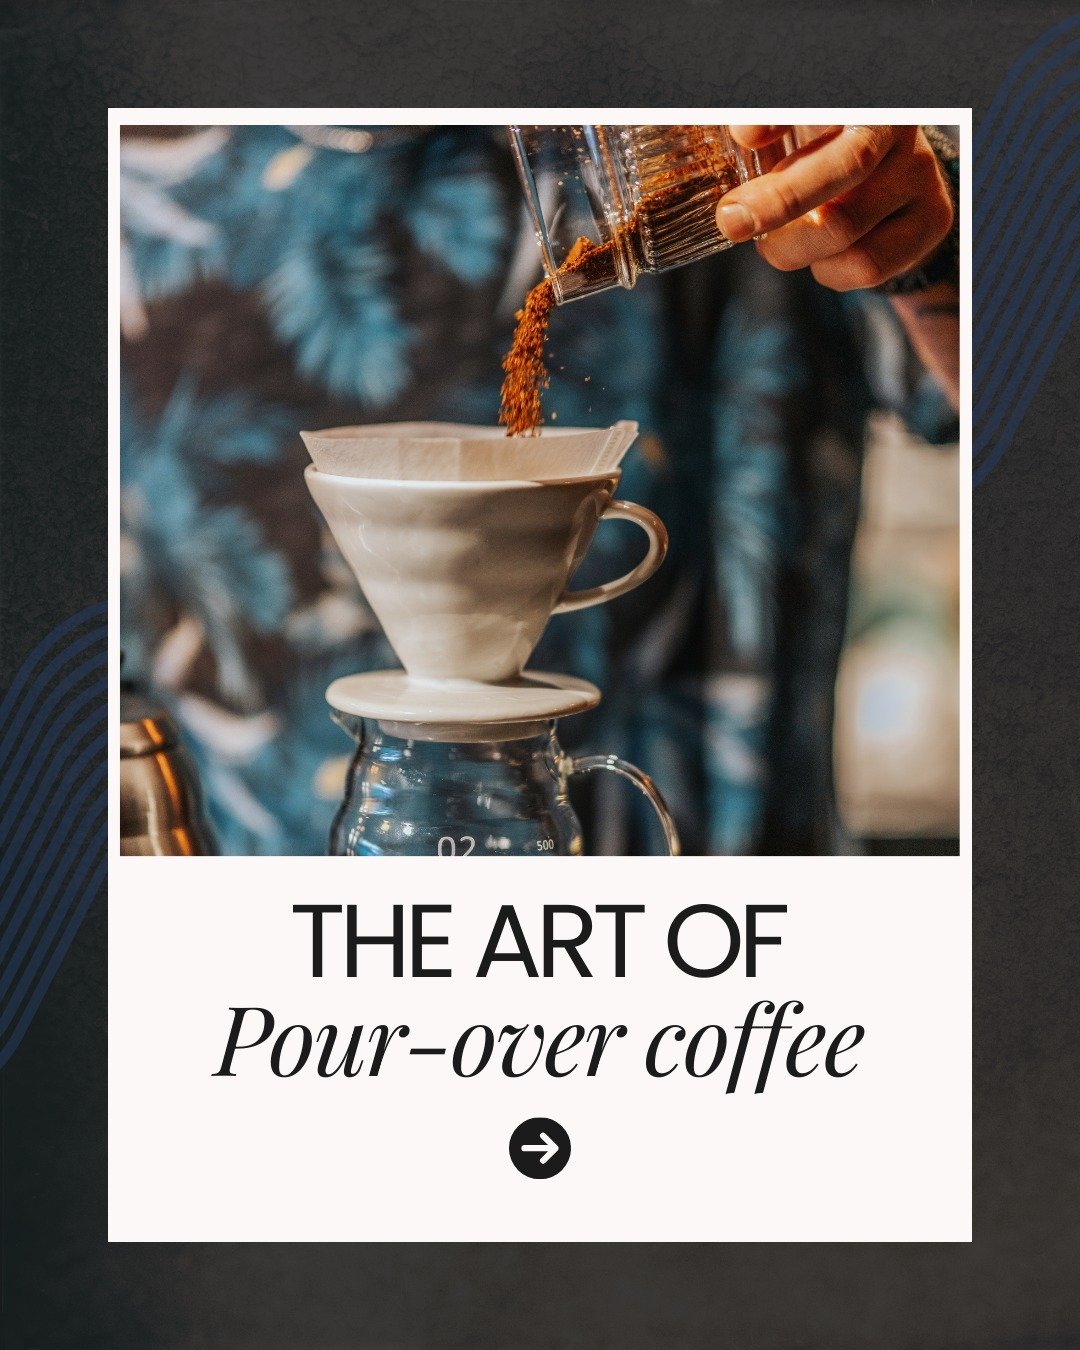 Swipe to unlock the art of pour-over coffee ↗️

Whether you&rsquo;re a coffee aficionado or just beginning to explore and experiment with different brewing methods, mastering pour-over coffee will change how you experience coffee.

So, we&rsquo;re br